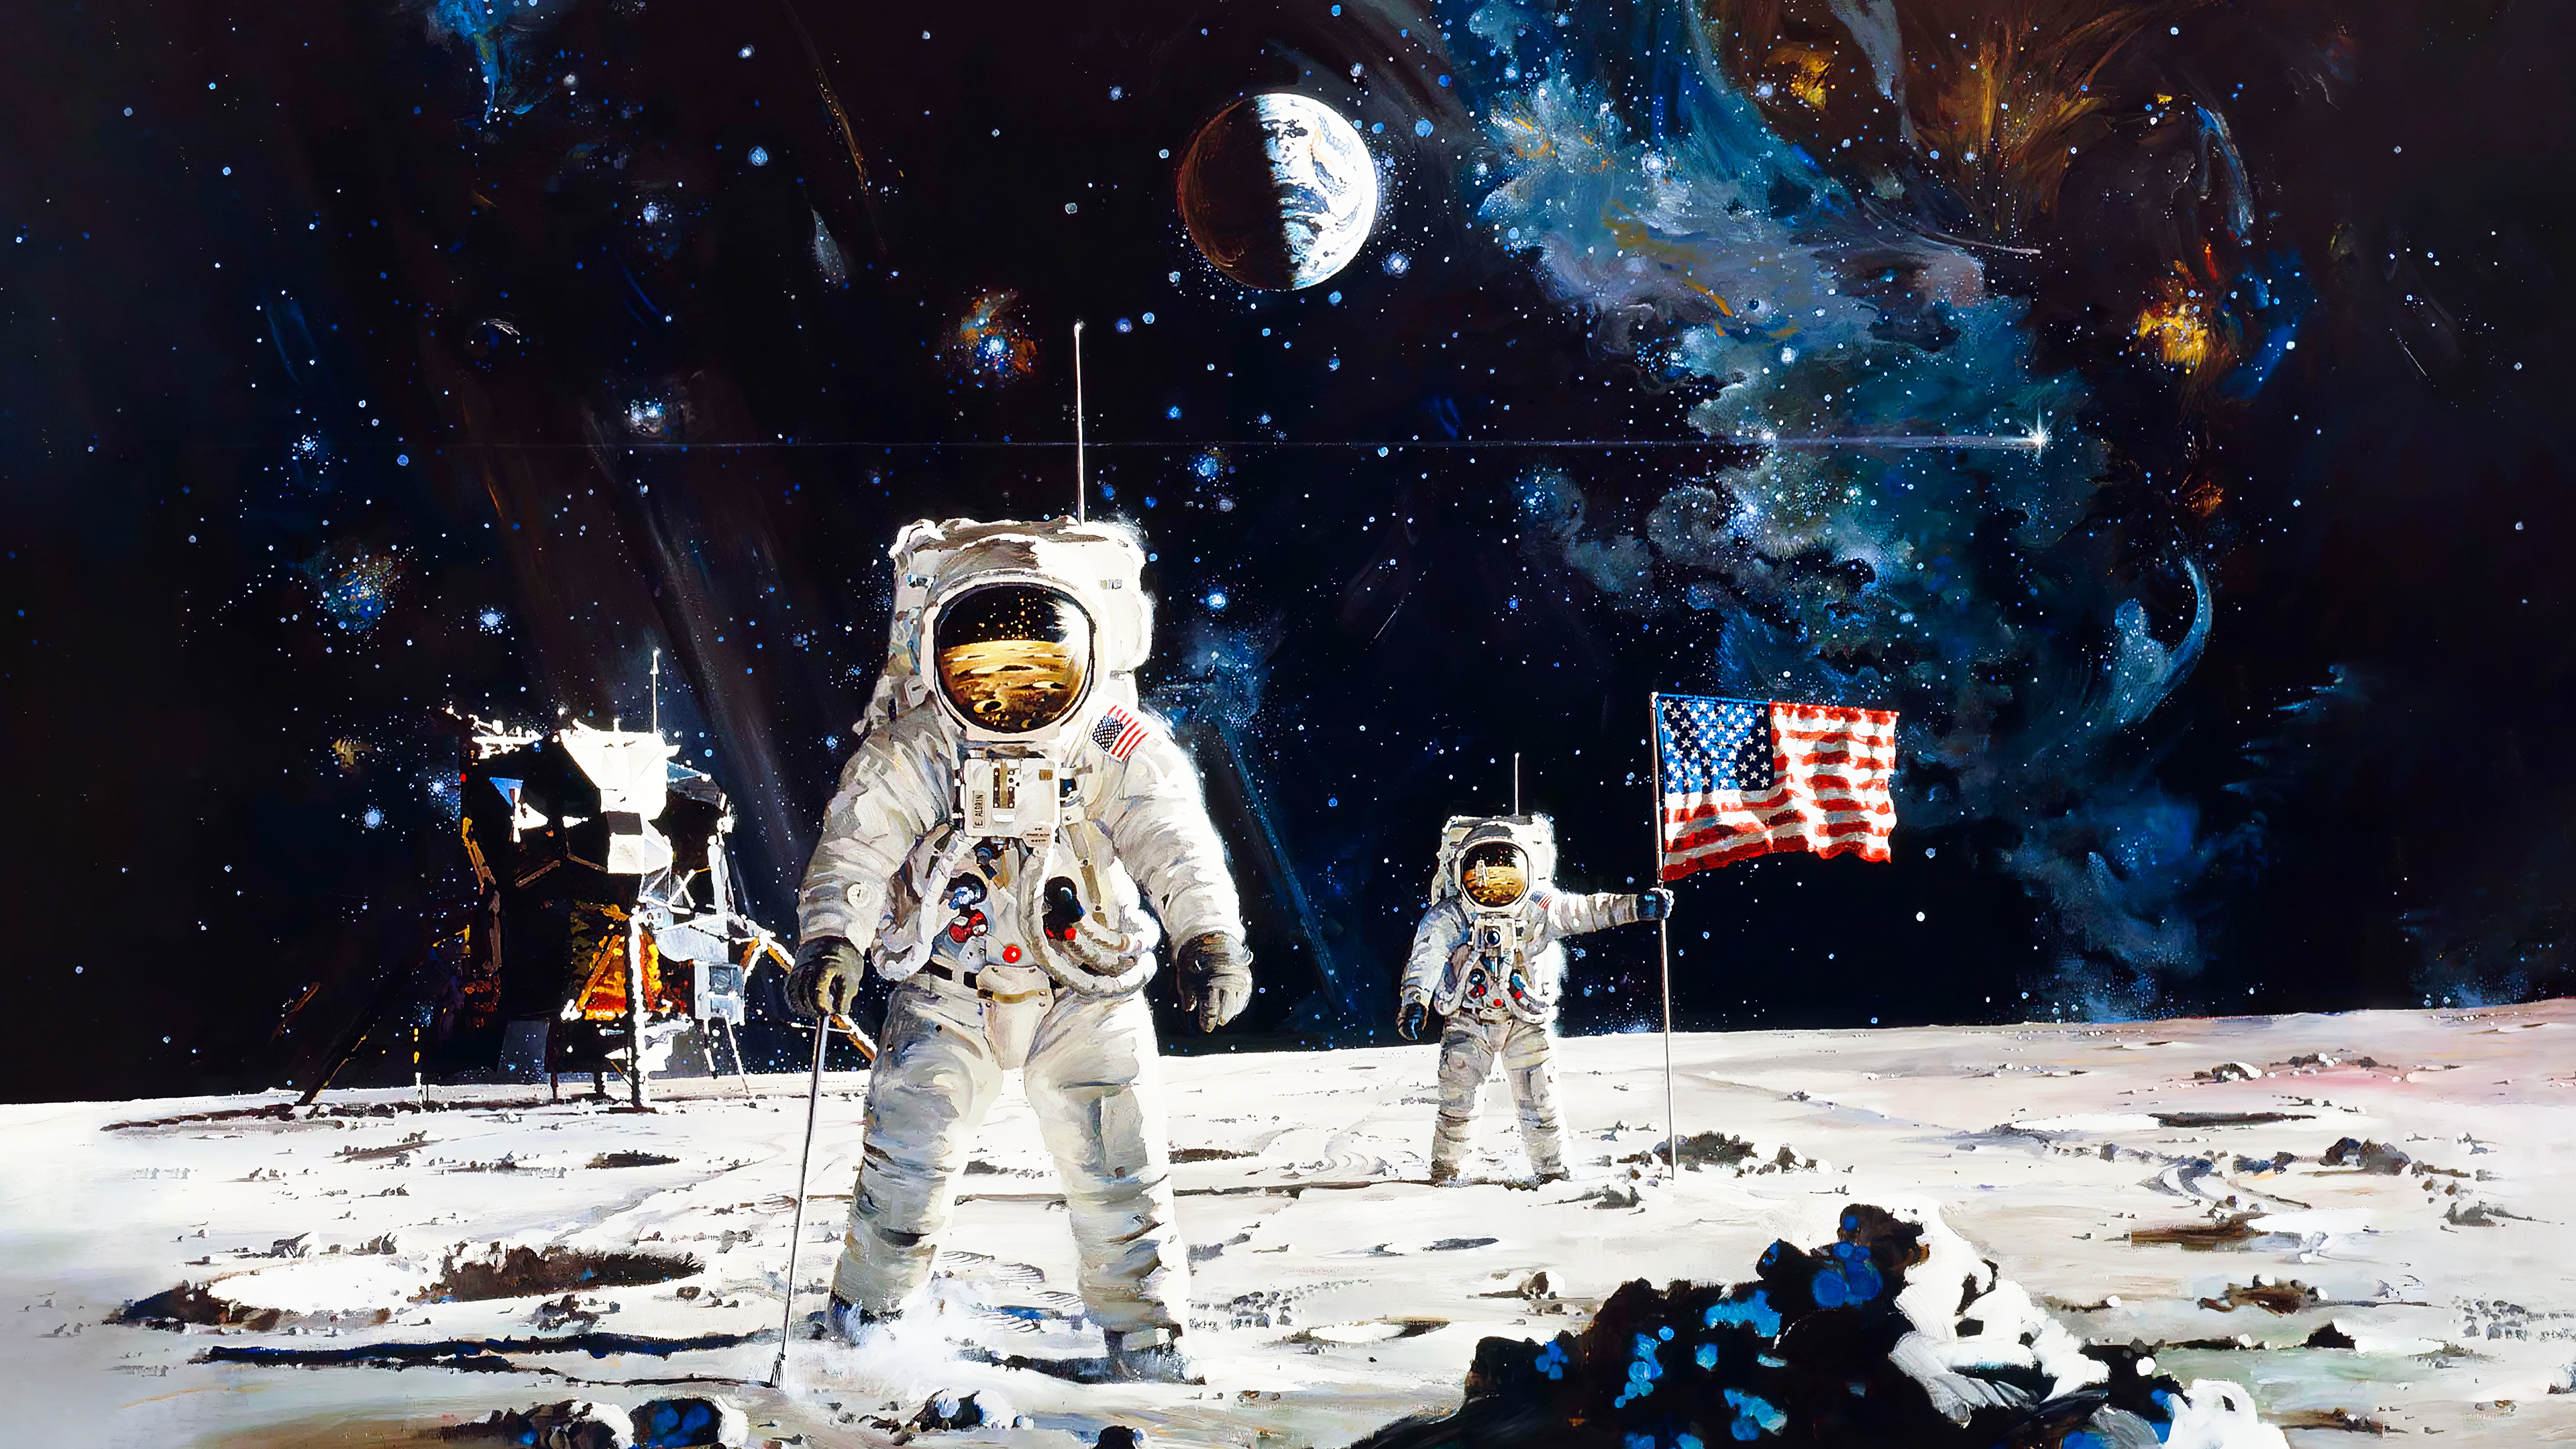 First Men on the Moon by Robert McCall (1971) [3840x2160]